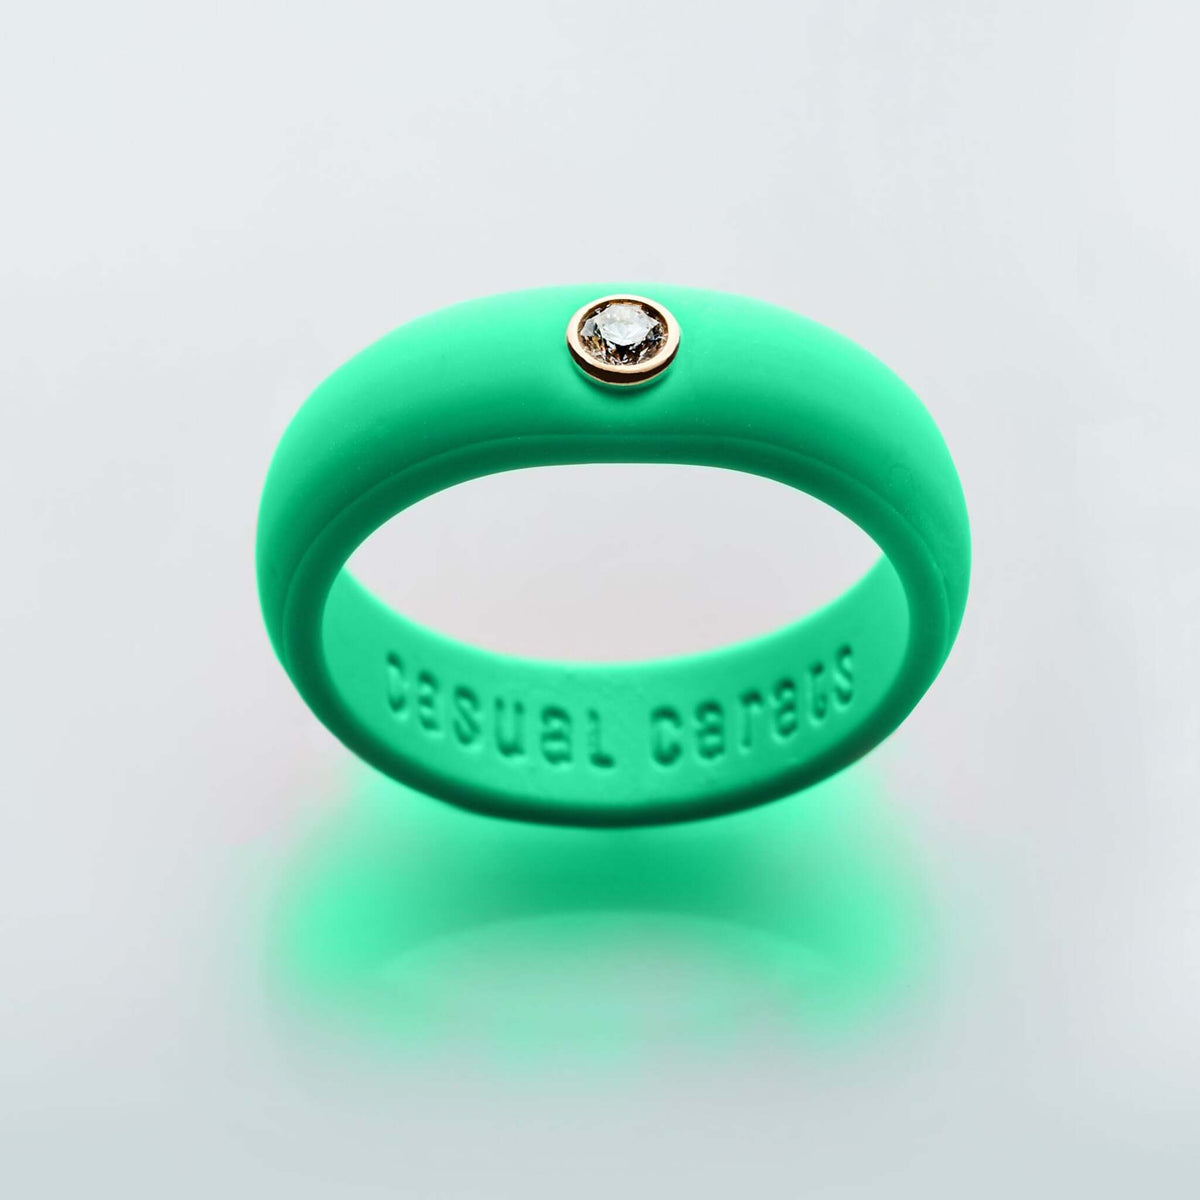 Casual Carats - Classic Collection - Retro Green Silicone Ring with Diamond - Set in White or Yellow 14K Gold